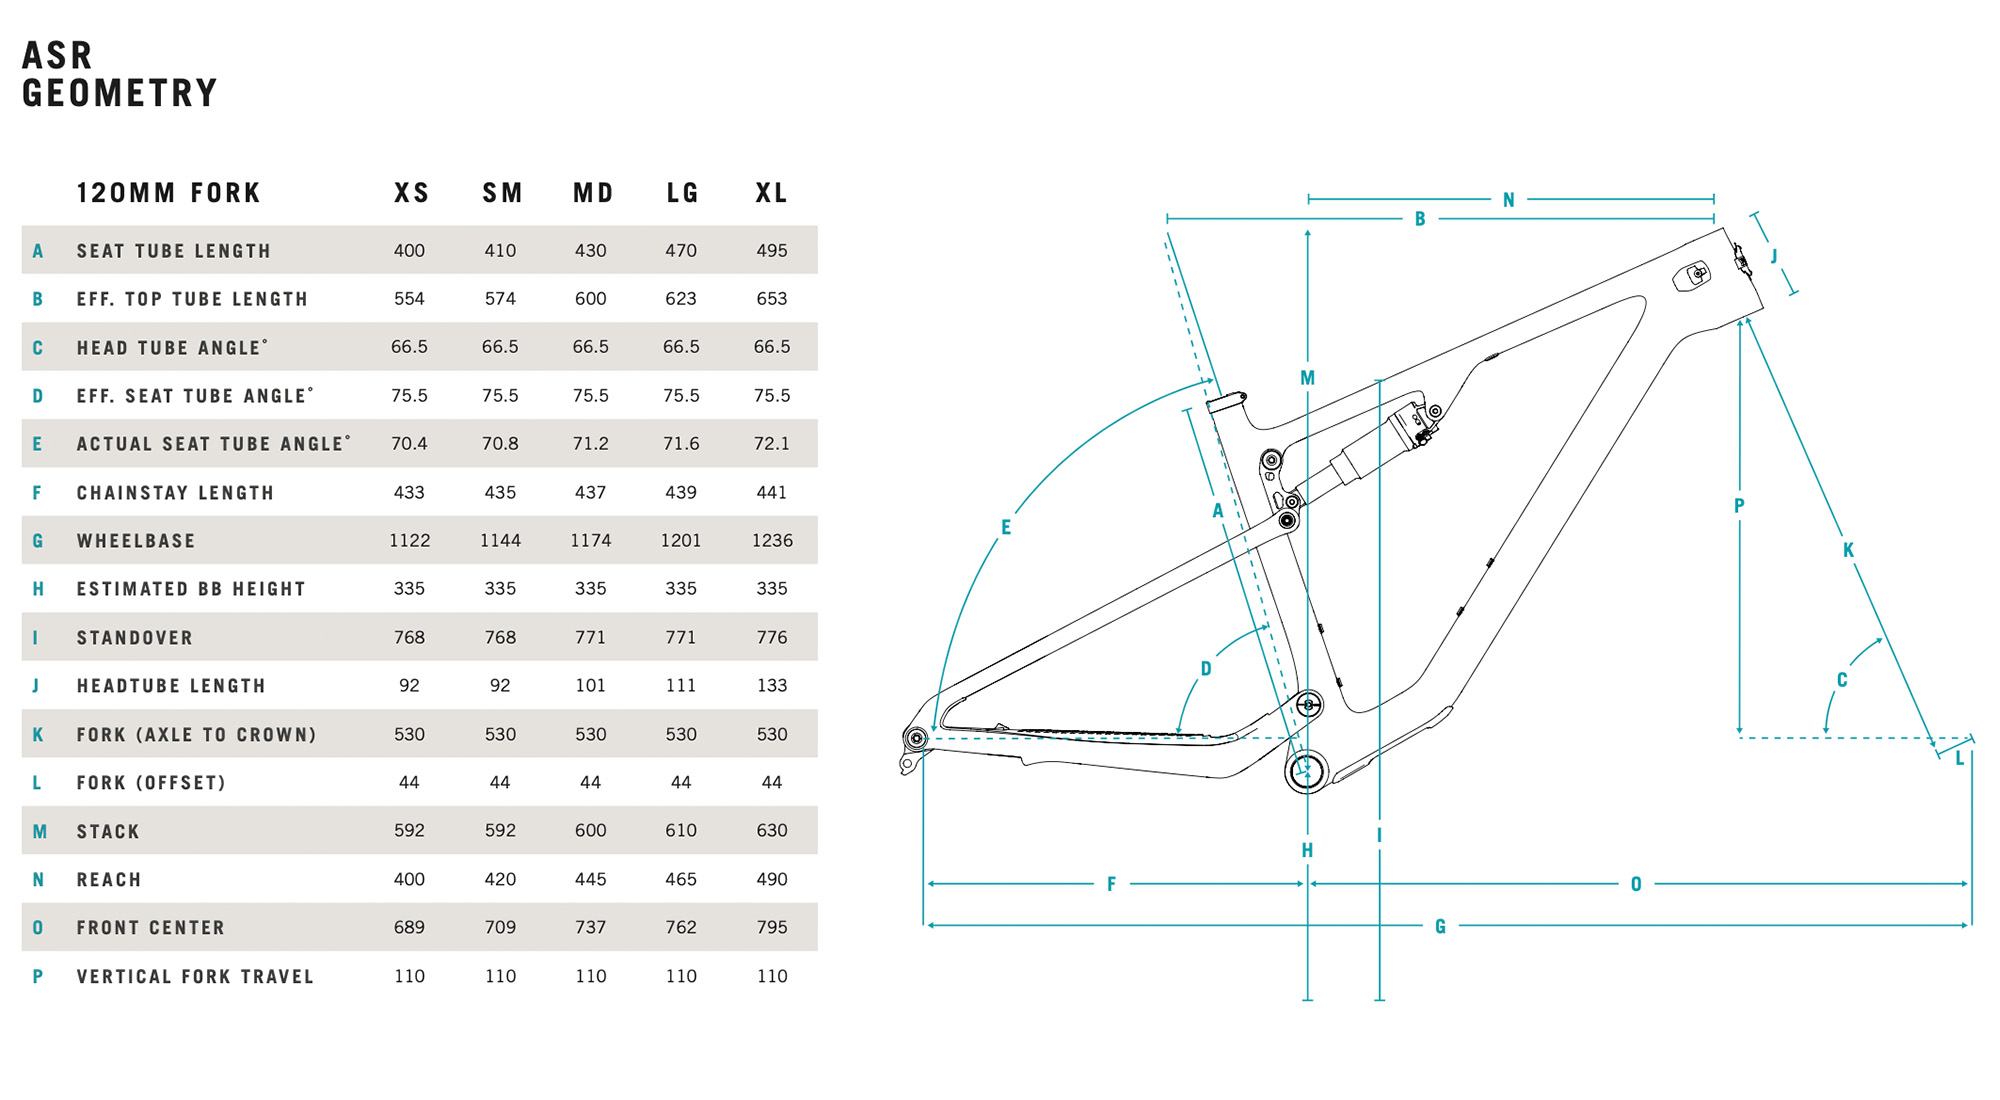 Geometry chart for the new ASR. 